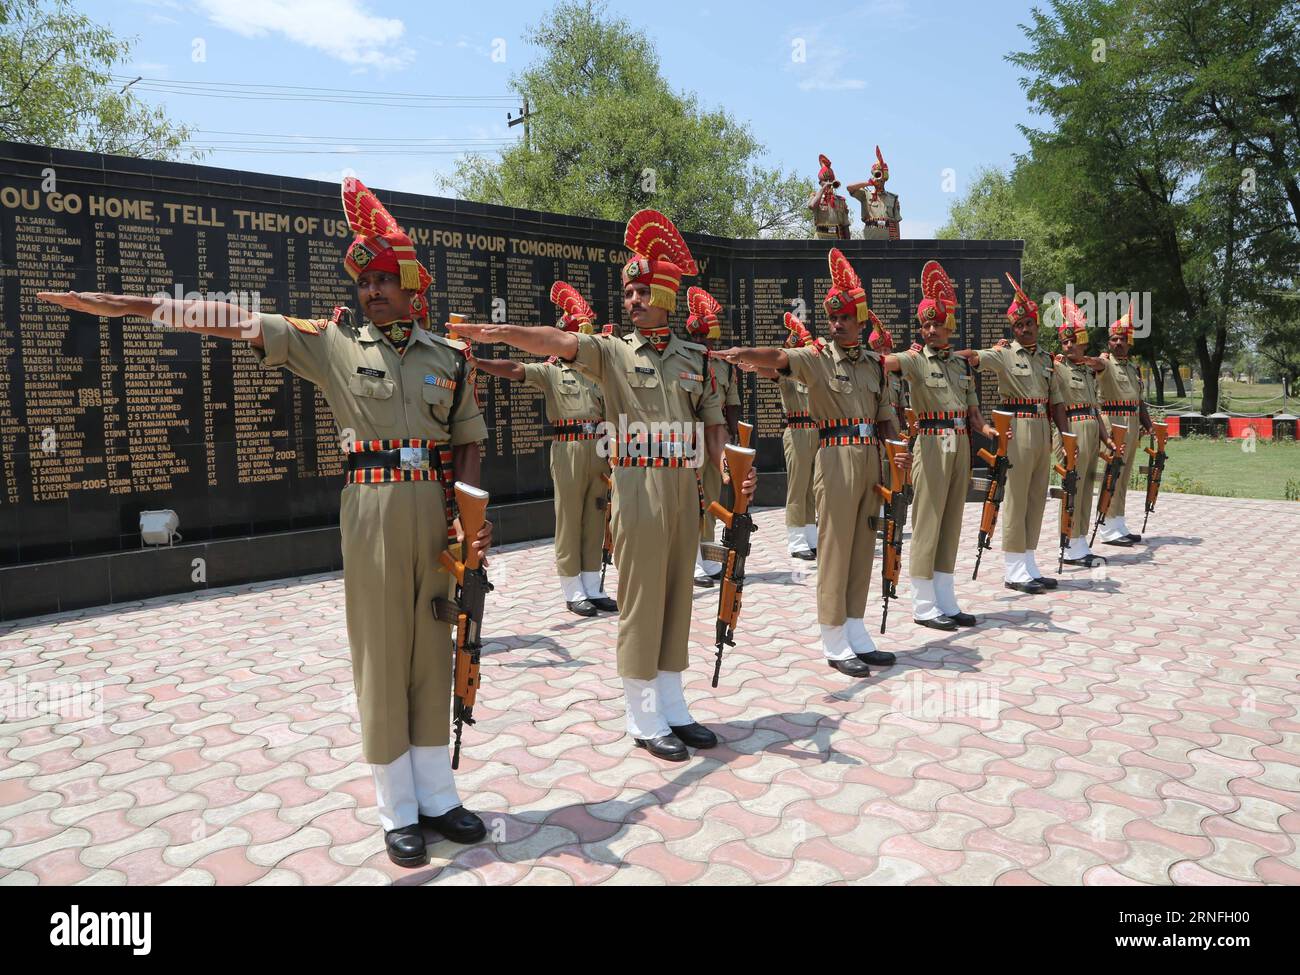 Indien - Beerdigung von Soldaten (160809) -- SRINAGAR, Aug. 9, 2016 -- India s Border Security Force troopers pay homage to slain troopers during wreath laying ceremony in Srinagar, summer capital of Indian-controlled Kashmir, on Aug. 9, 2016. Three Indian troops including a junior level officer and a militant were killed Monday in a fierce gunfight near the Line of Control (LoC), dividing Kashmir. ) (cyc) INDIAN-CONTROLLED KASHMIR-SRINAGAR-THREE BORDER GUARDS KILLED JavedxDar PUBLICATIONxNOTxINxCHN   India Funeral from Soldiers 160809 Srinagar Aug 9 2016 India S Border Security Force Troopers Stock Photo